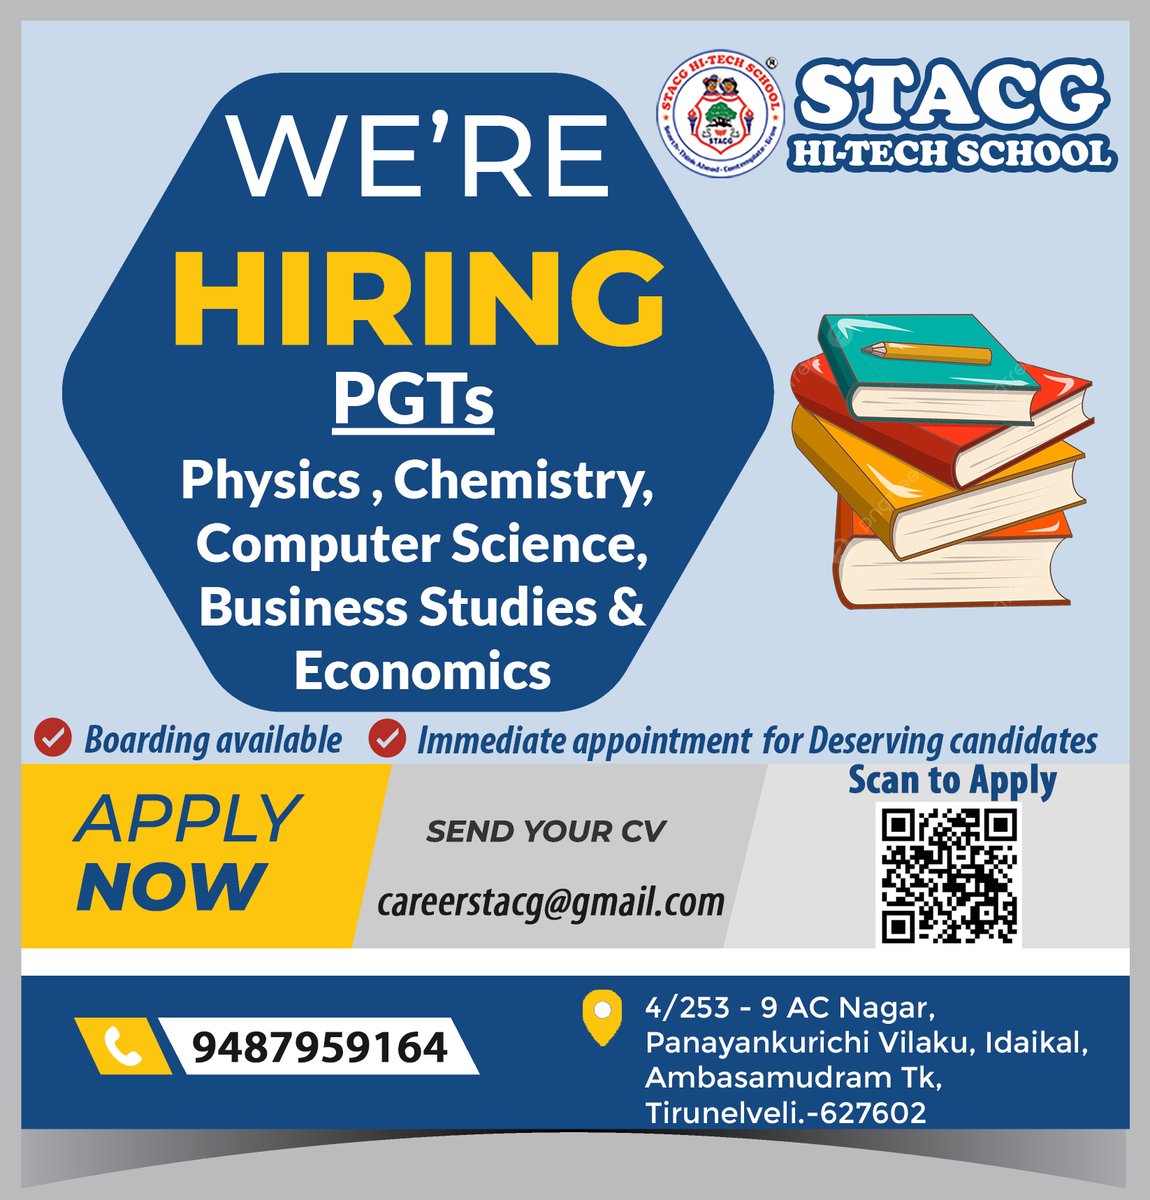 Teachers Wanted - PGTs - Physics, Chemistry, Computer Science, Business Studies & Economics
Boarding available &  Immediate appointment for Deserving candidates
#teacherswanted #wearehiring